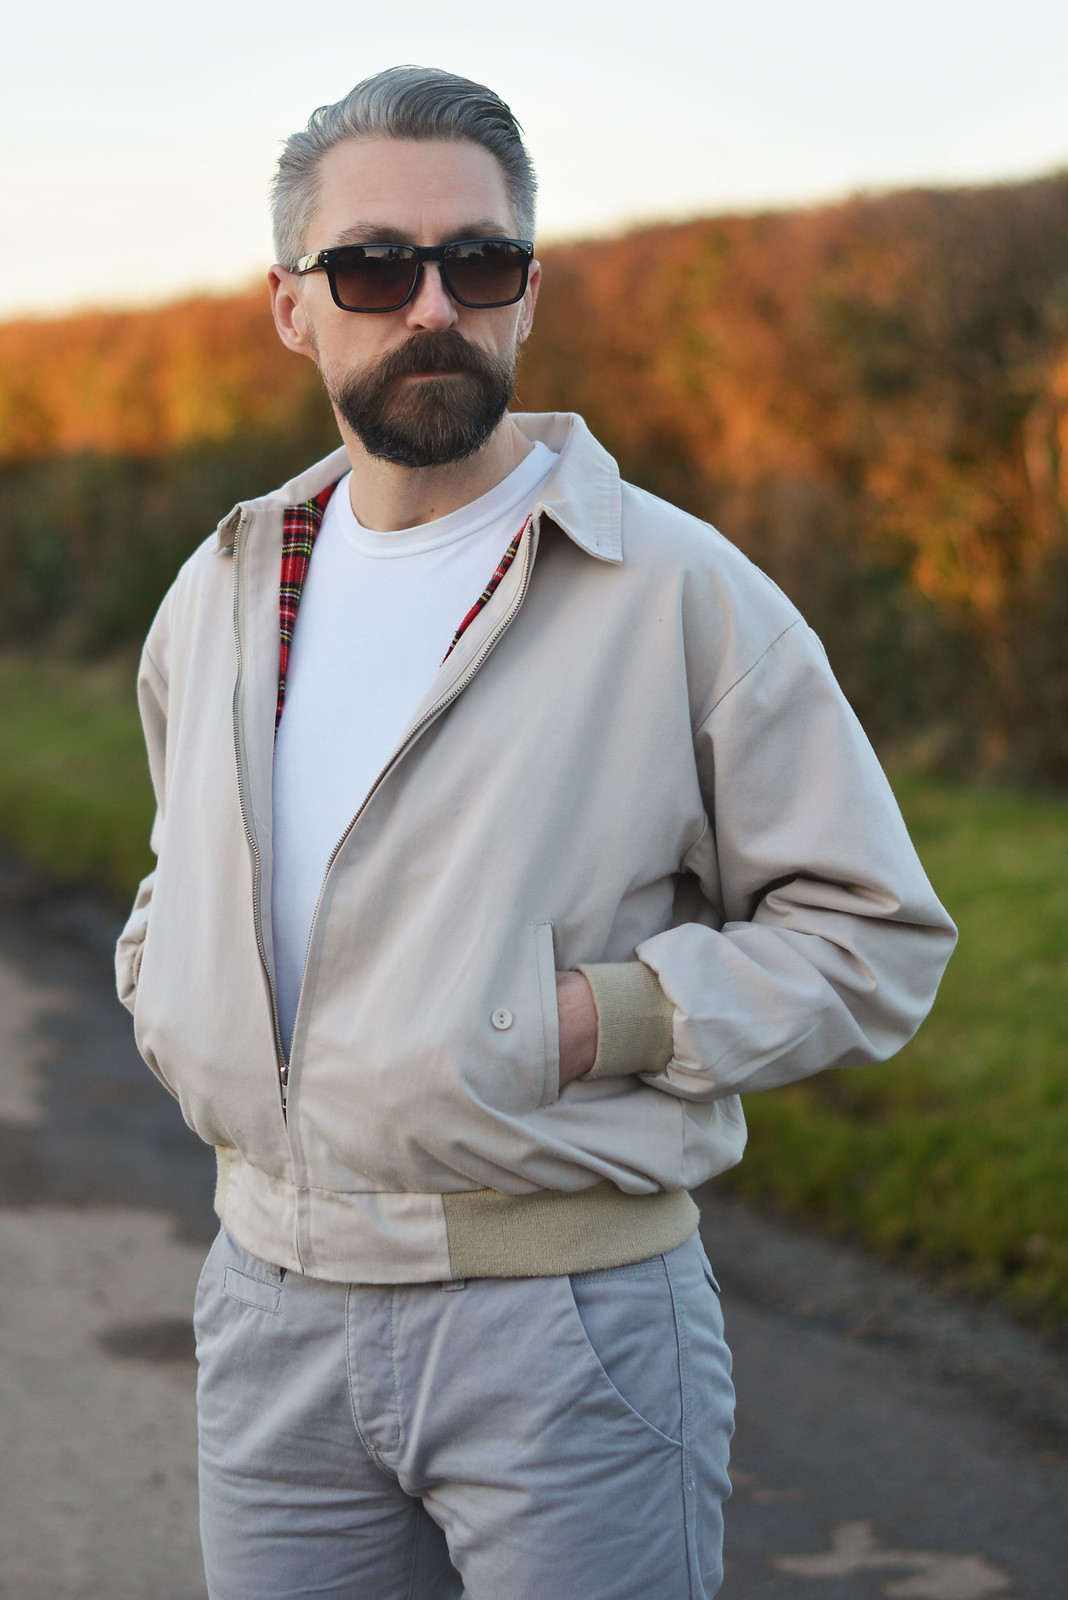 Casual weekend wear for over 40 men: Harrington jacket \ white t-shirt \ grey chinos \ white Converse | Silver Lononder, over 40 menswear blog